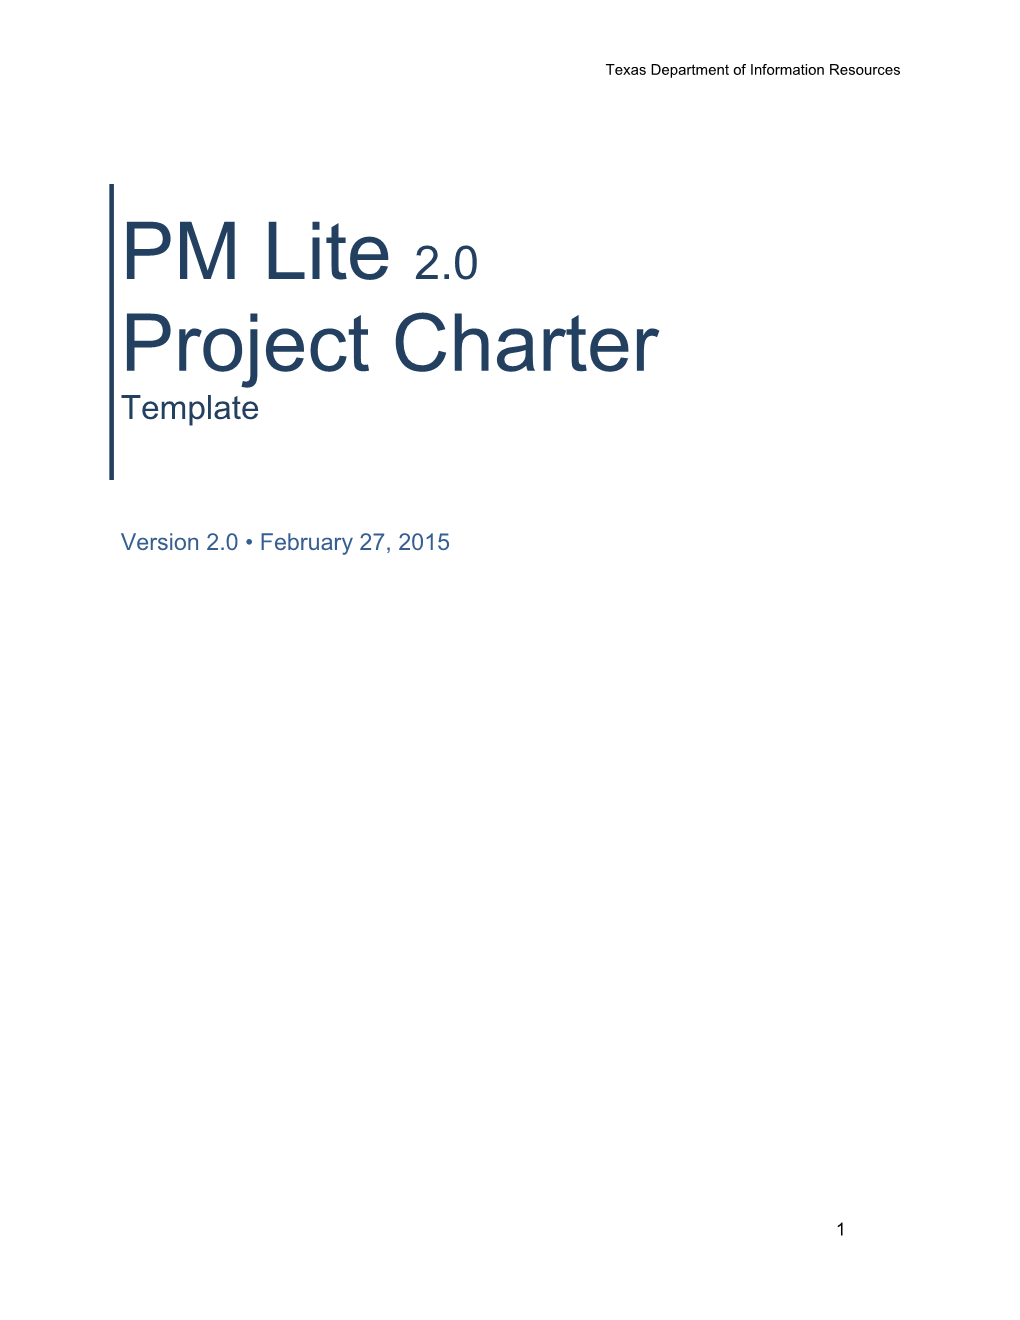 PM Lite Project Charter Template 2.0